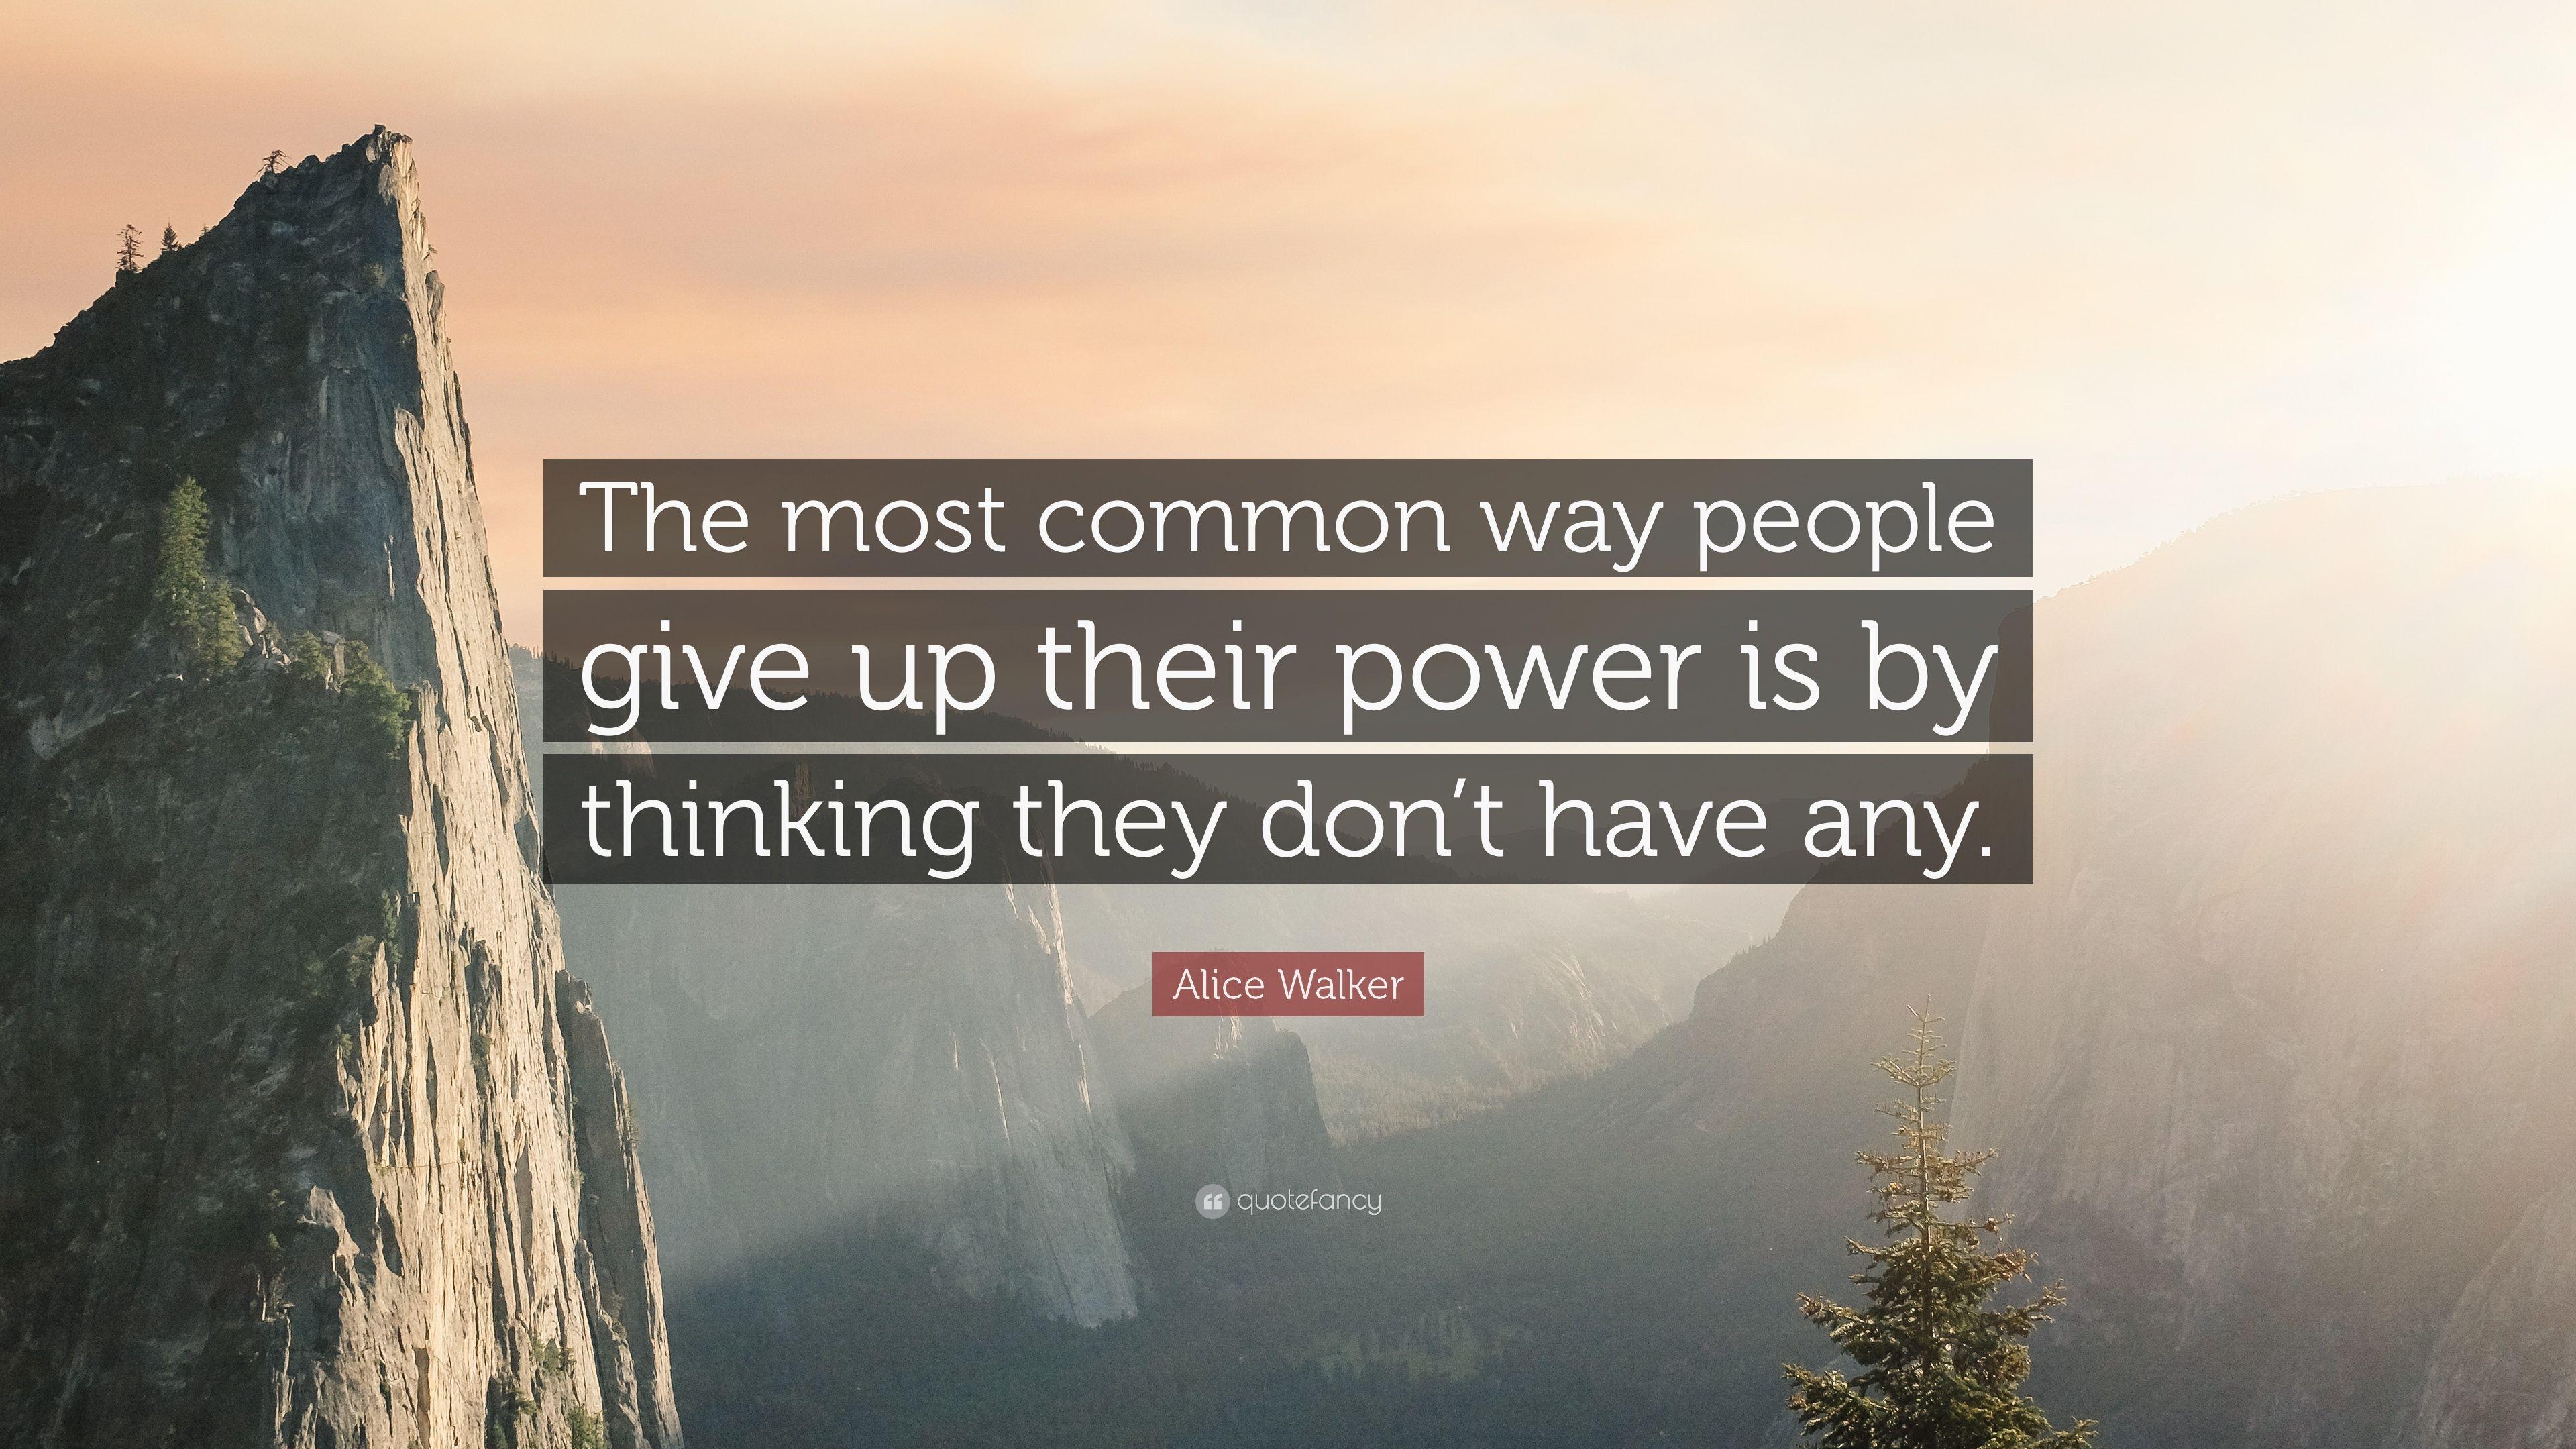 Alice Walker Quote: “The most common way people give up their power